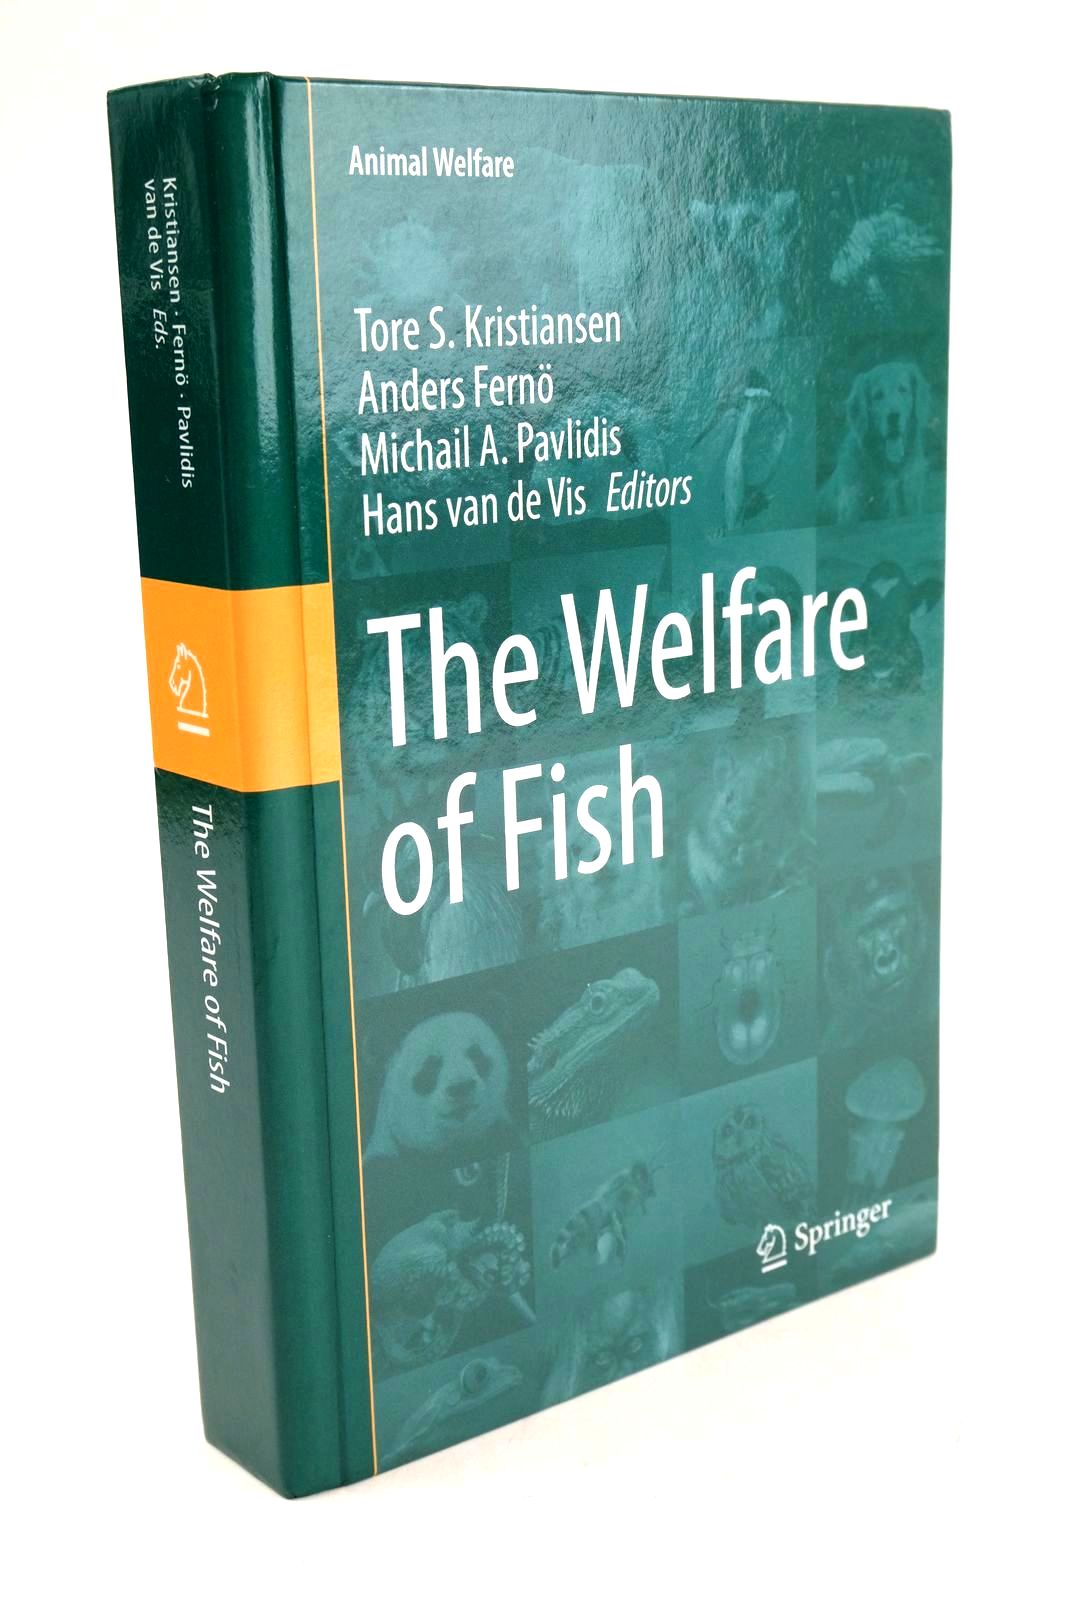 Photo of THE WELFARE OF FISH written by Kristiansen, Tore S. Ferno, Anders Pavlidis, Michail A. Van De Vis, Hans published by Springer (STOCK CODE: 1324174)  for sale by Stella & Rose's Books